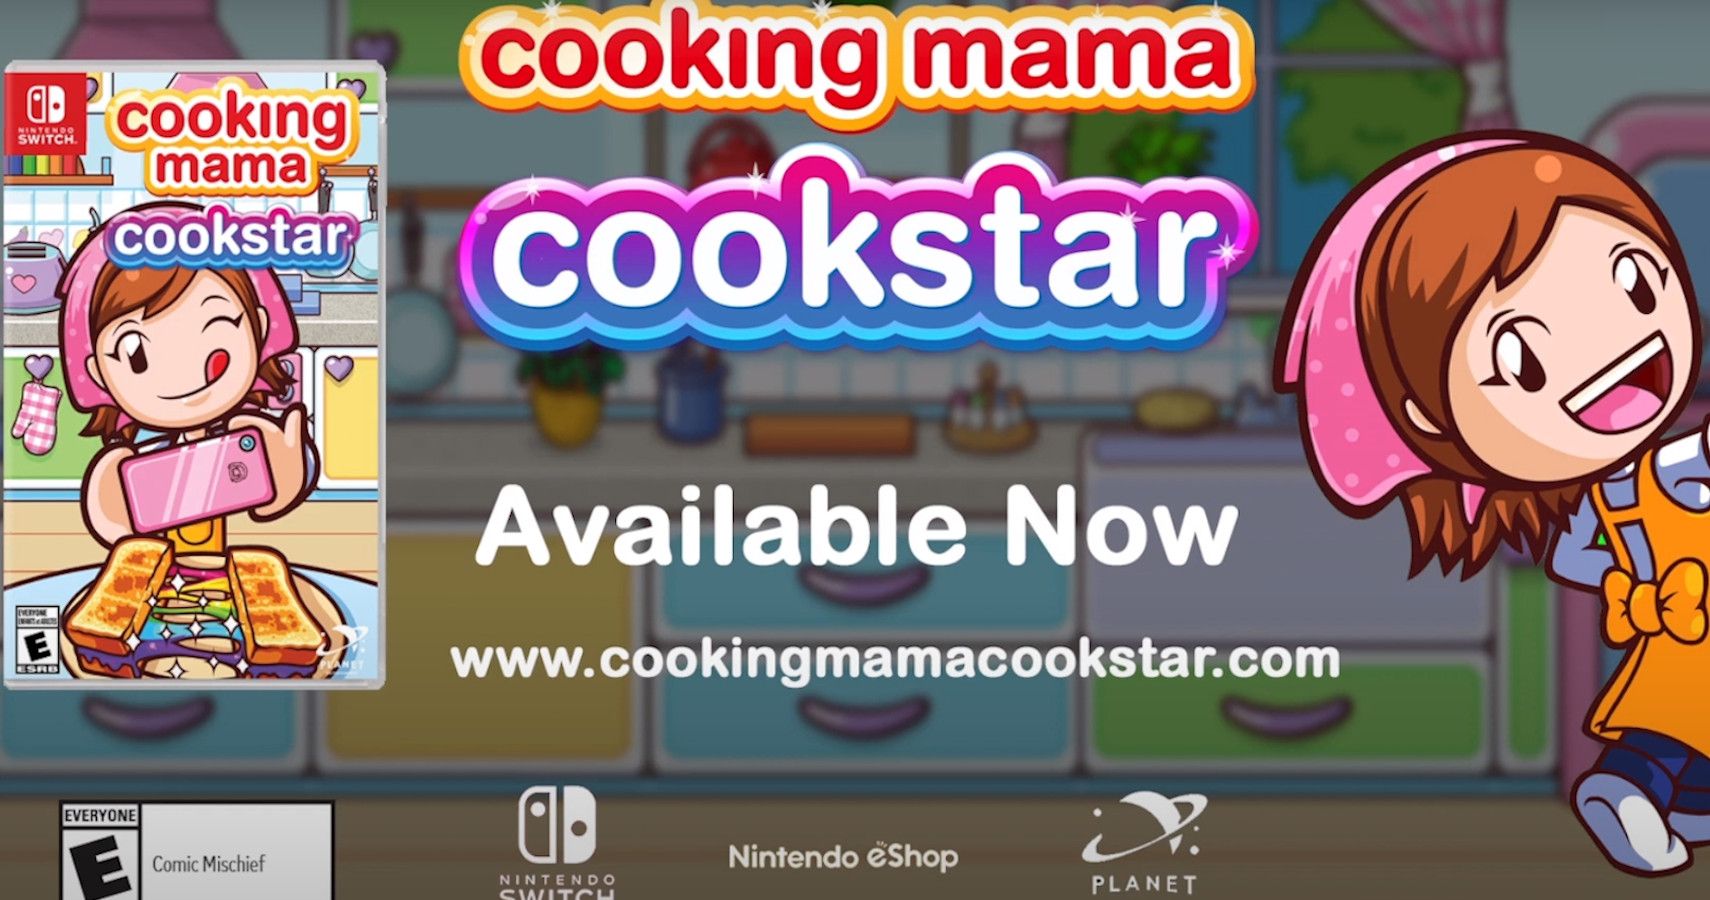 Cooking Mama Cookstar Publisher Now Selling Official Physical Game Copies On Their Site